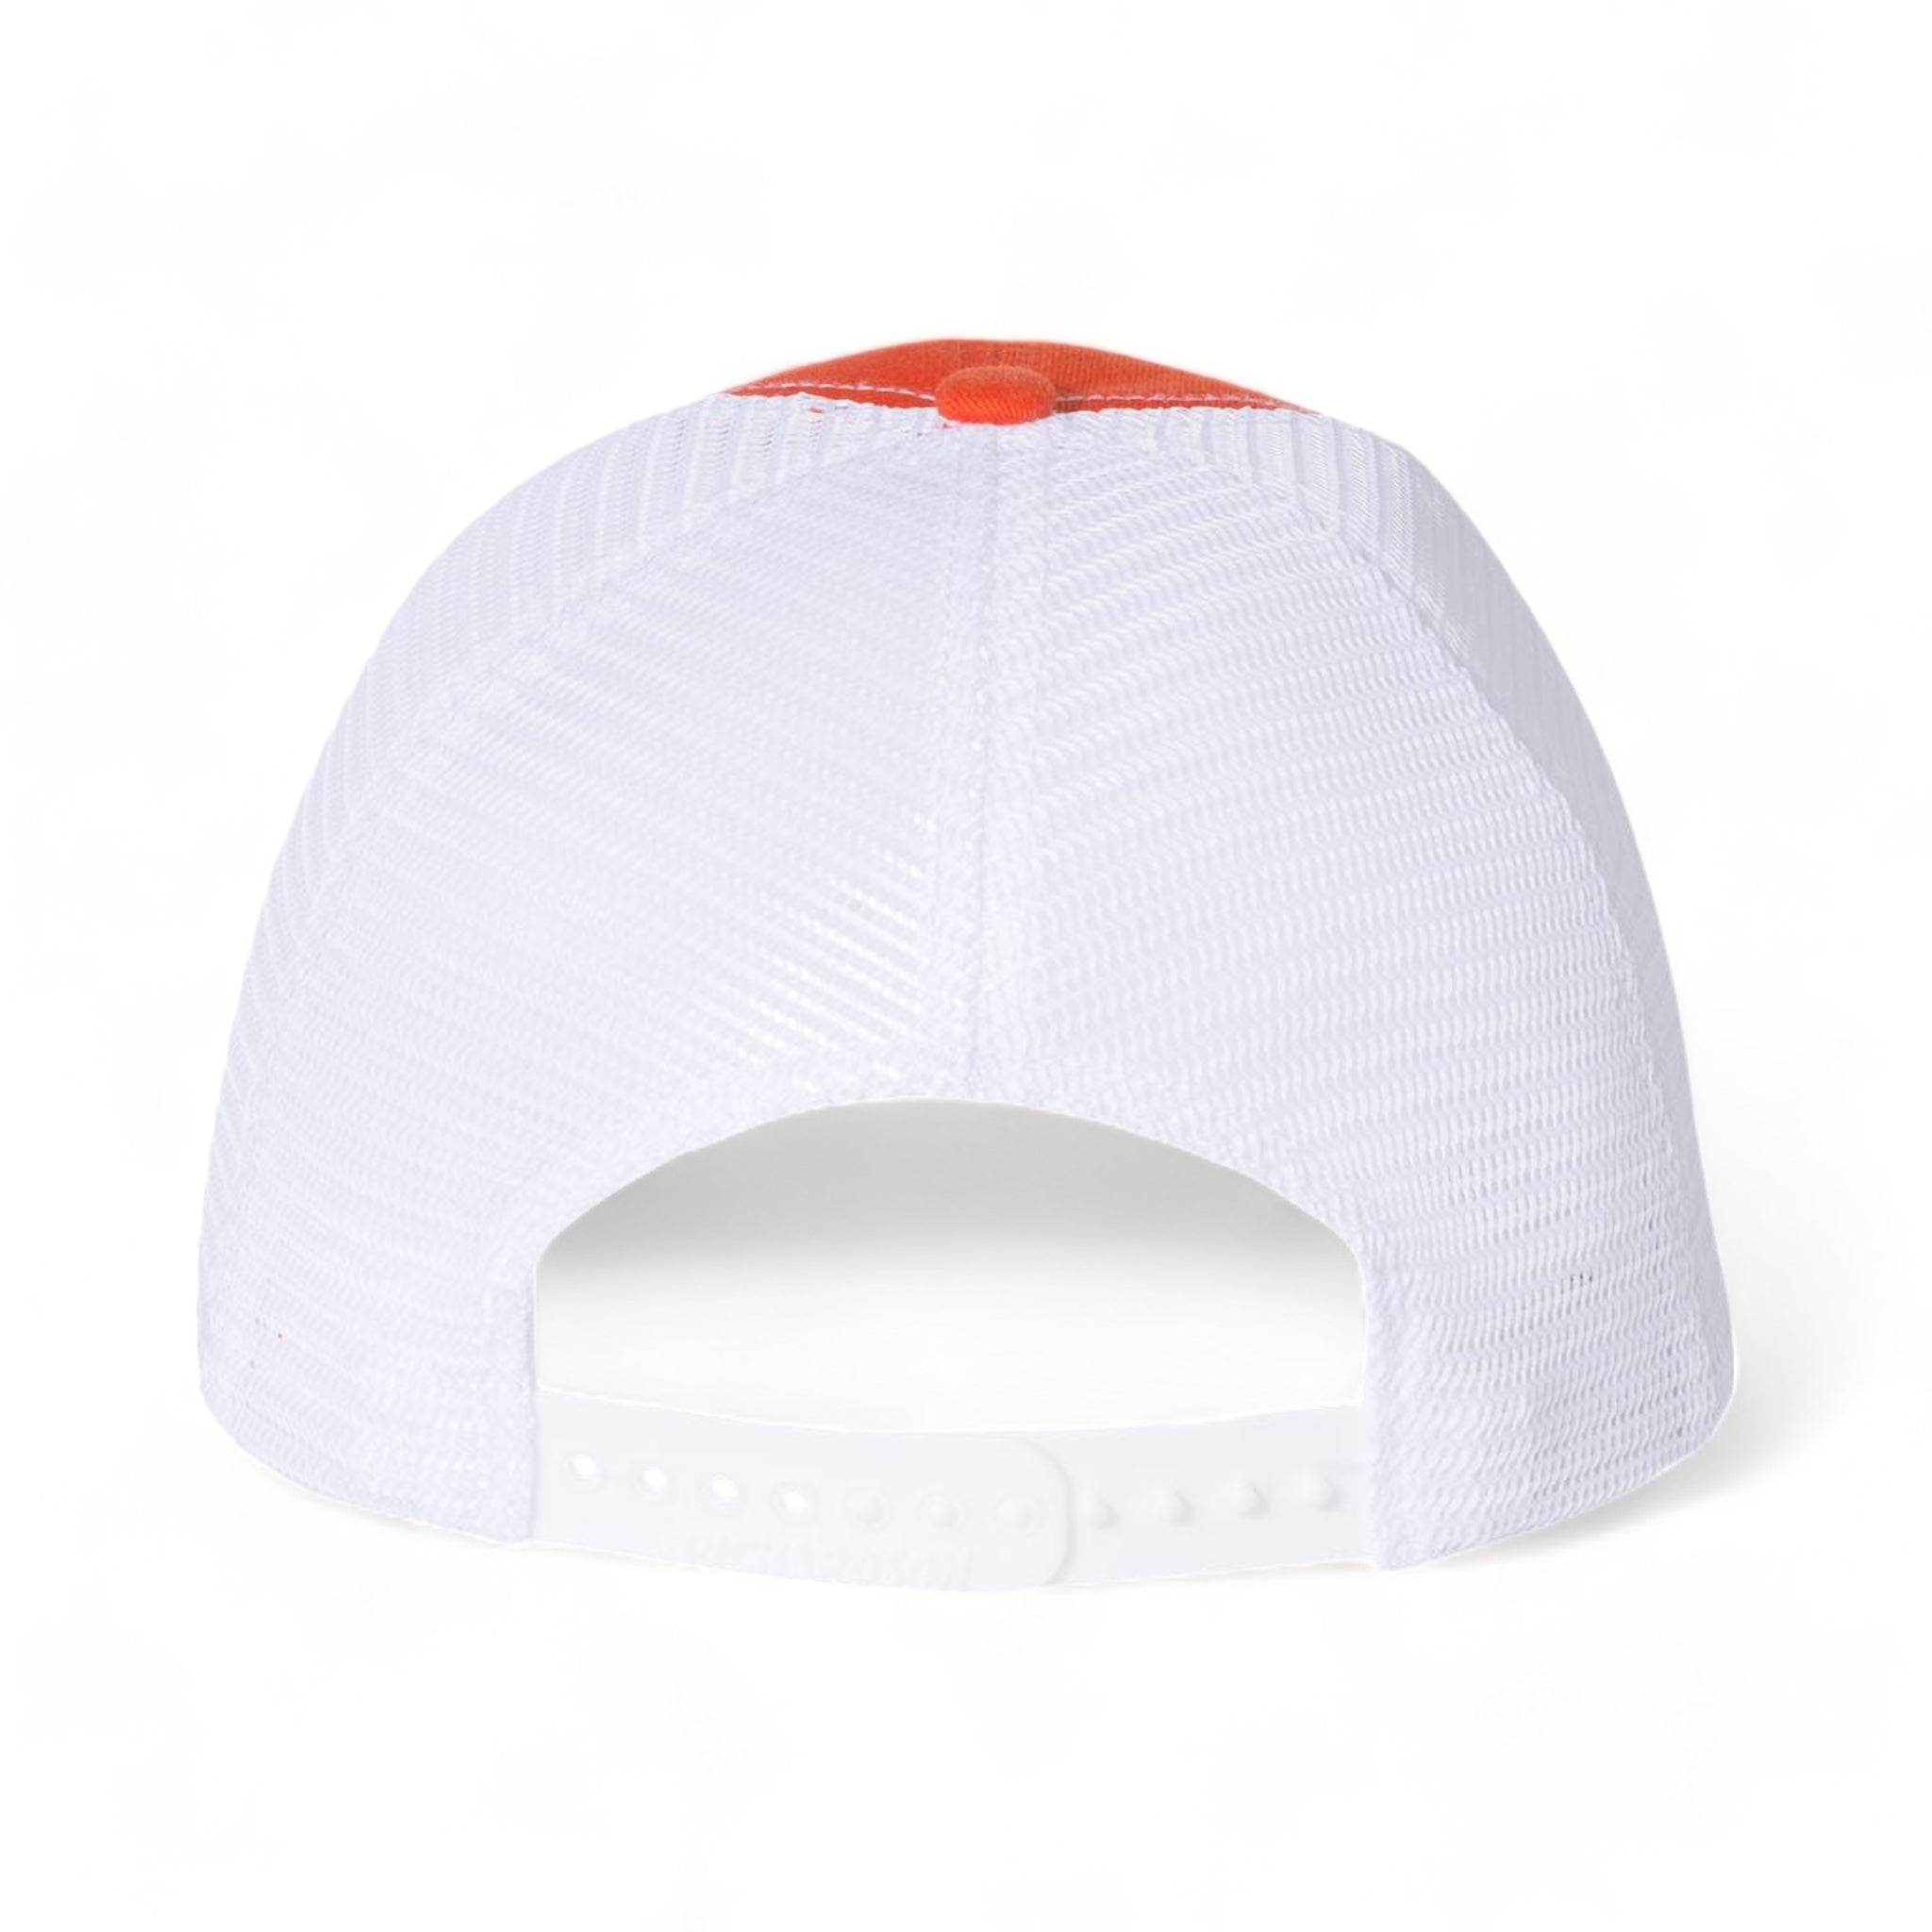 Back view of Richardson 111 custom hat in orange and white